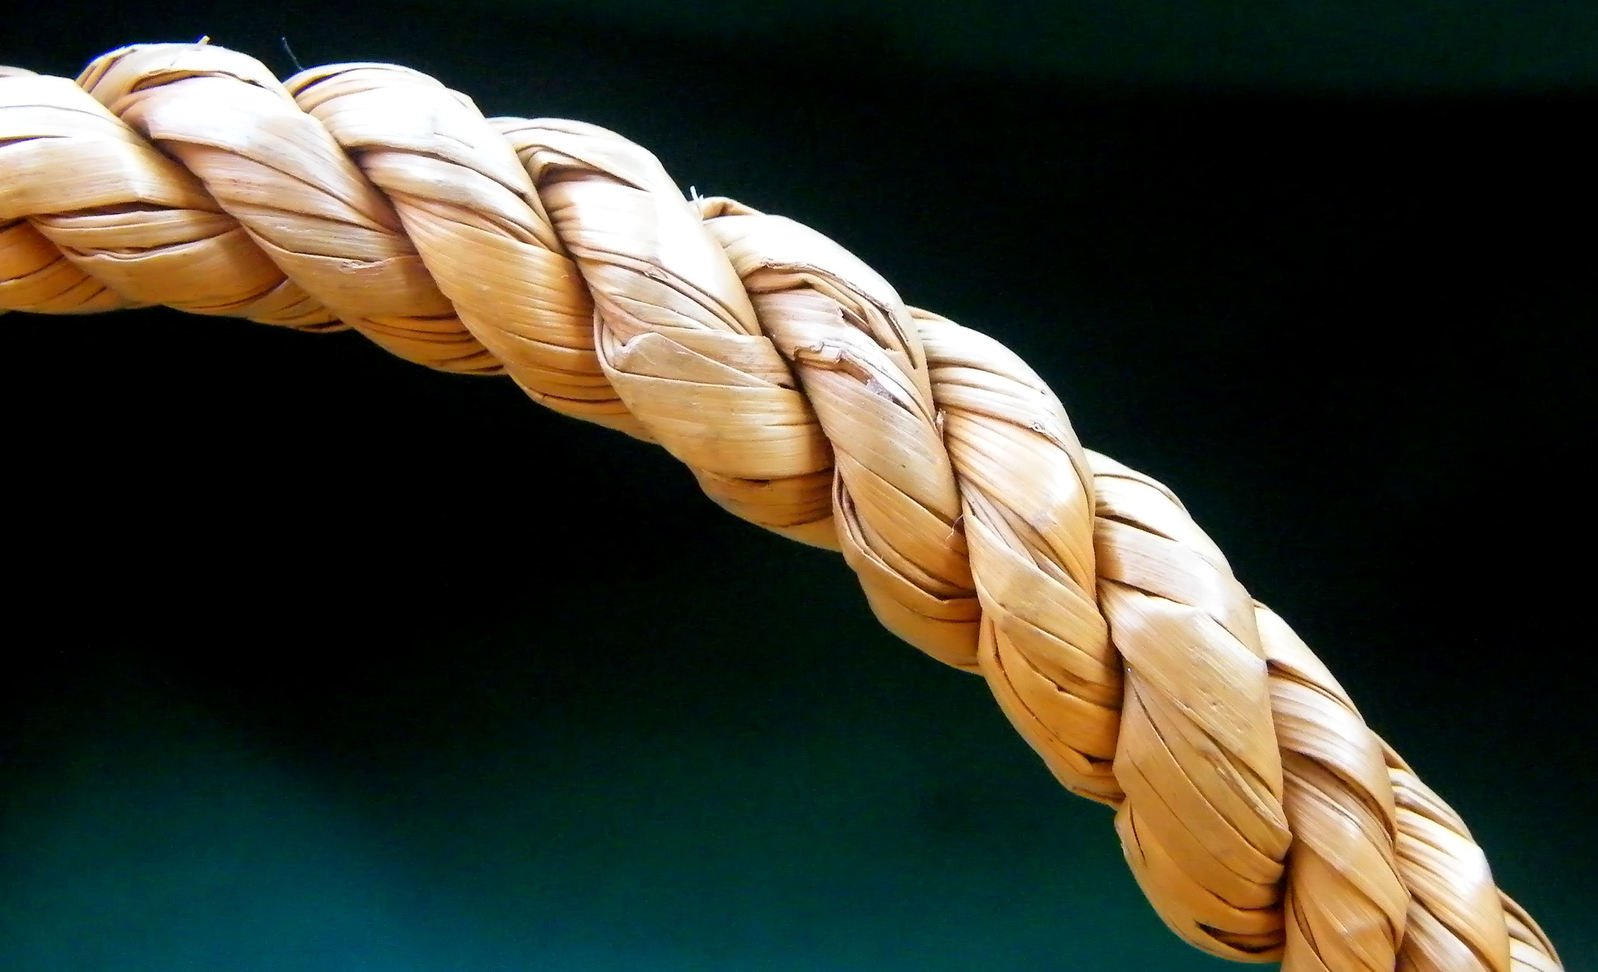 a knot made out of rope is pictured